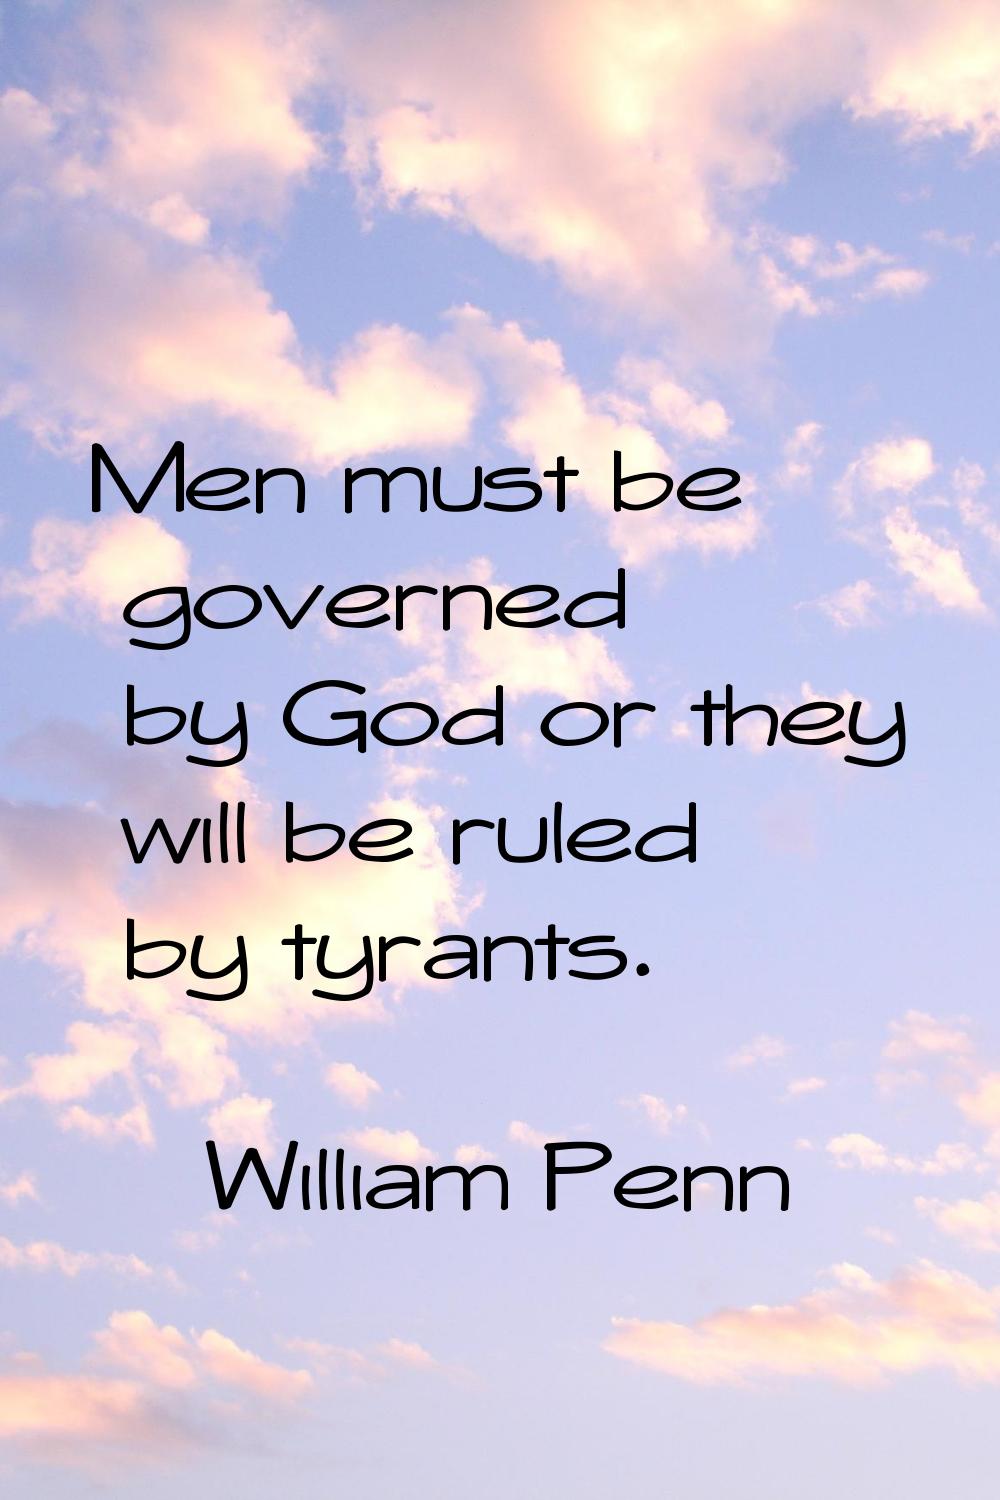 Men must be governed by God or they will be ruled by tyrants.